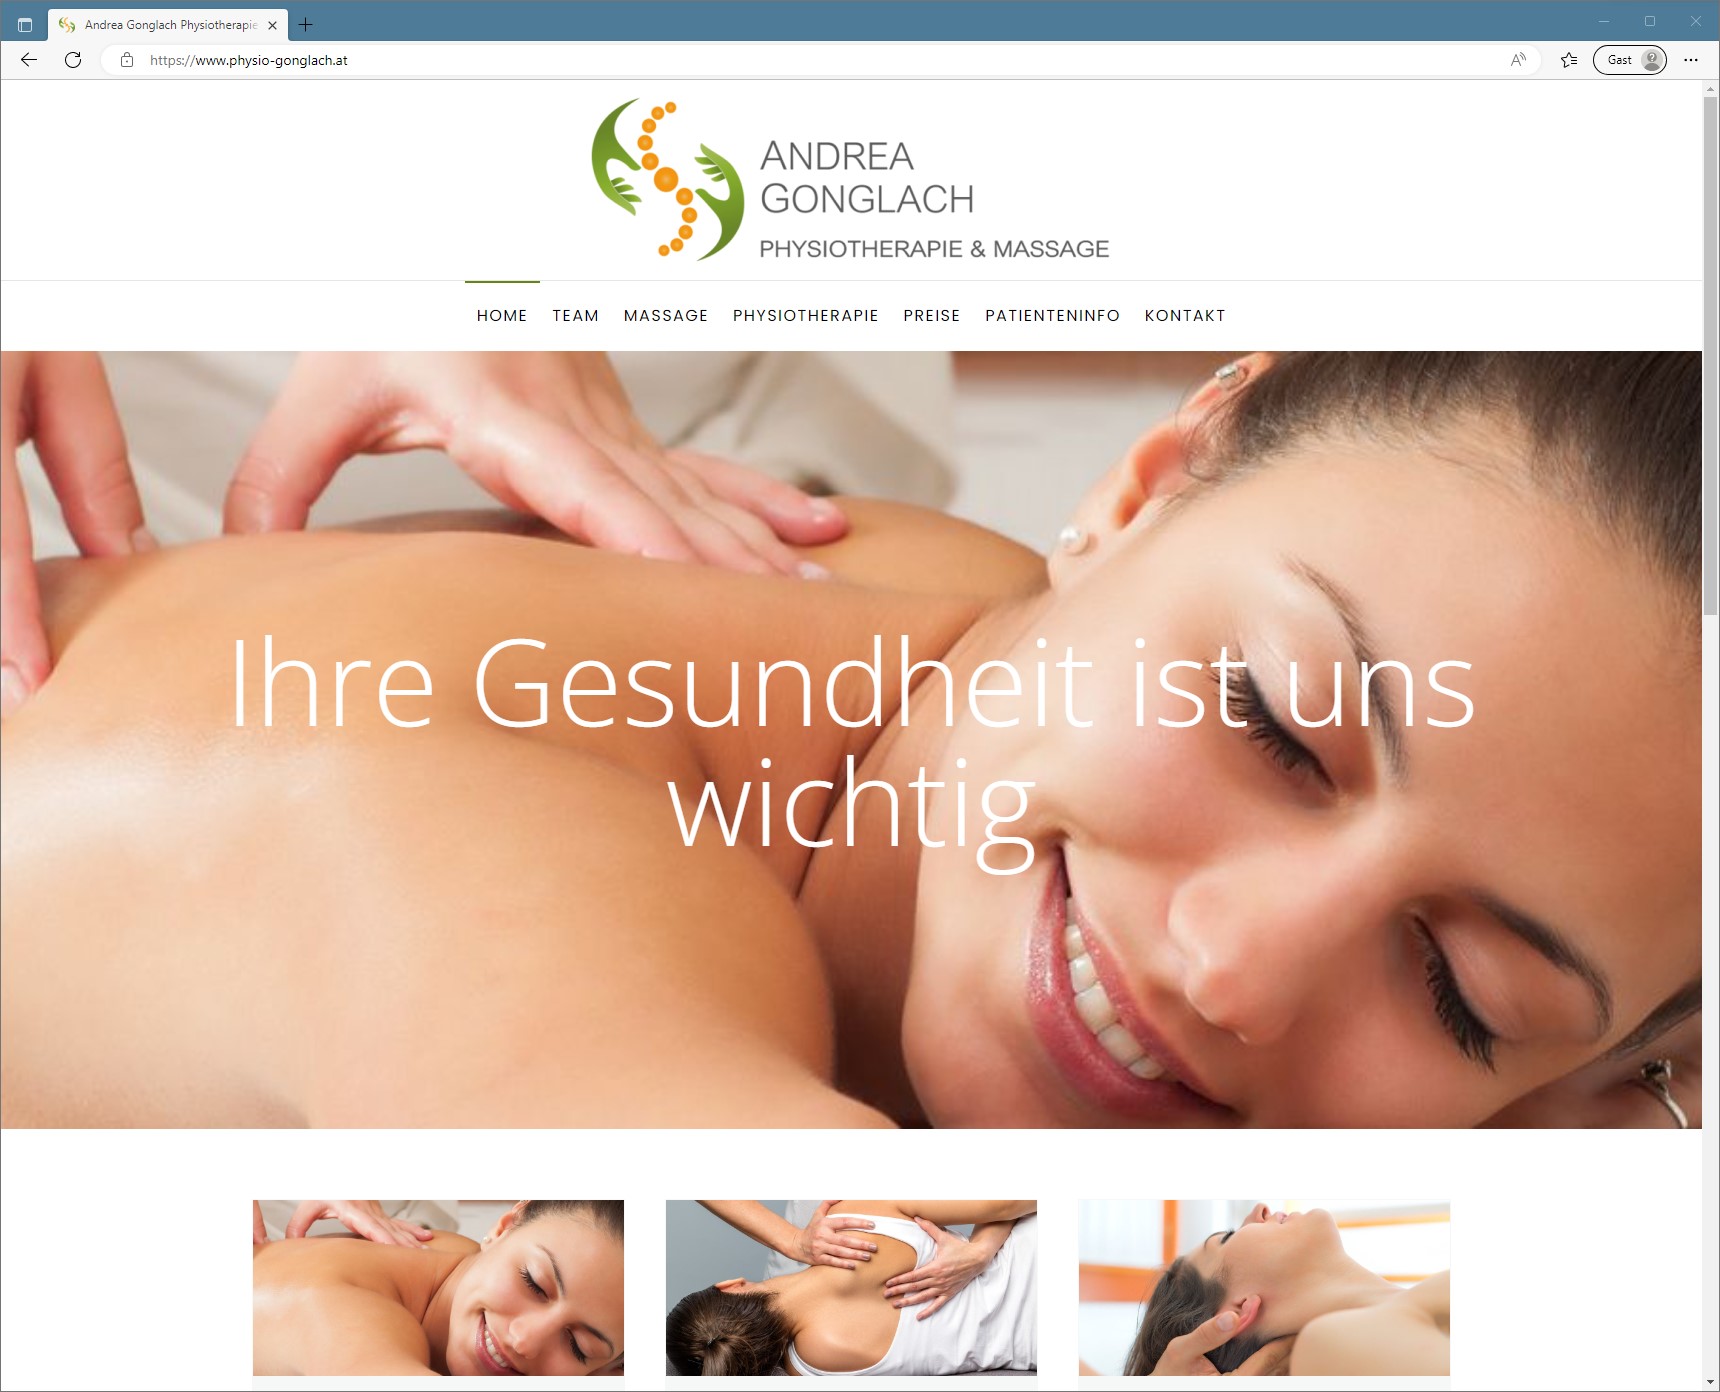 Physiotherapie / Massage Andrea Gonglach